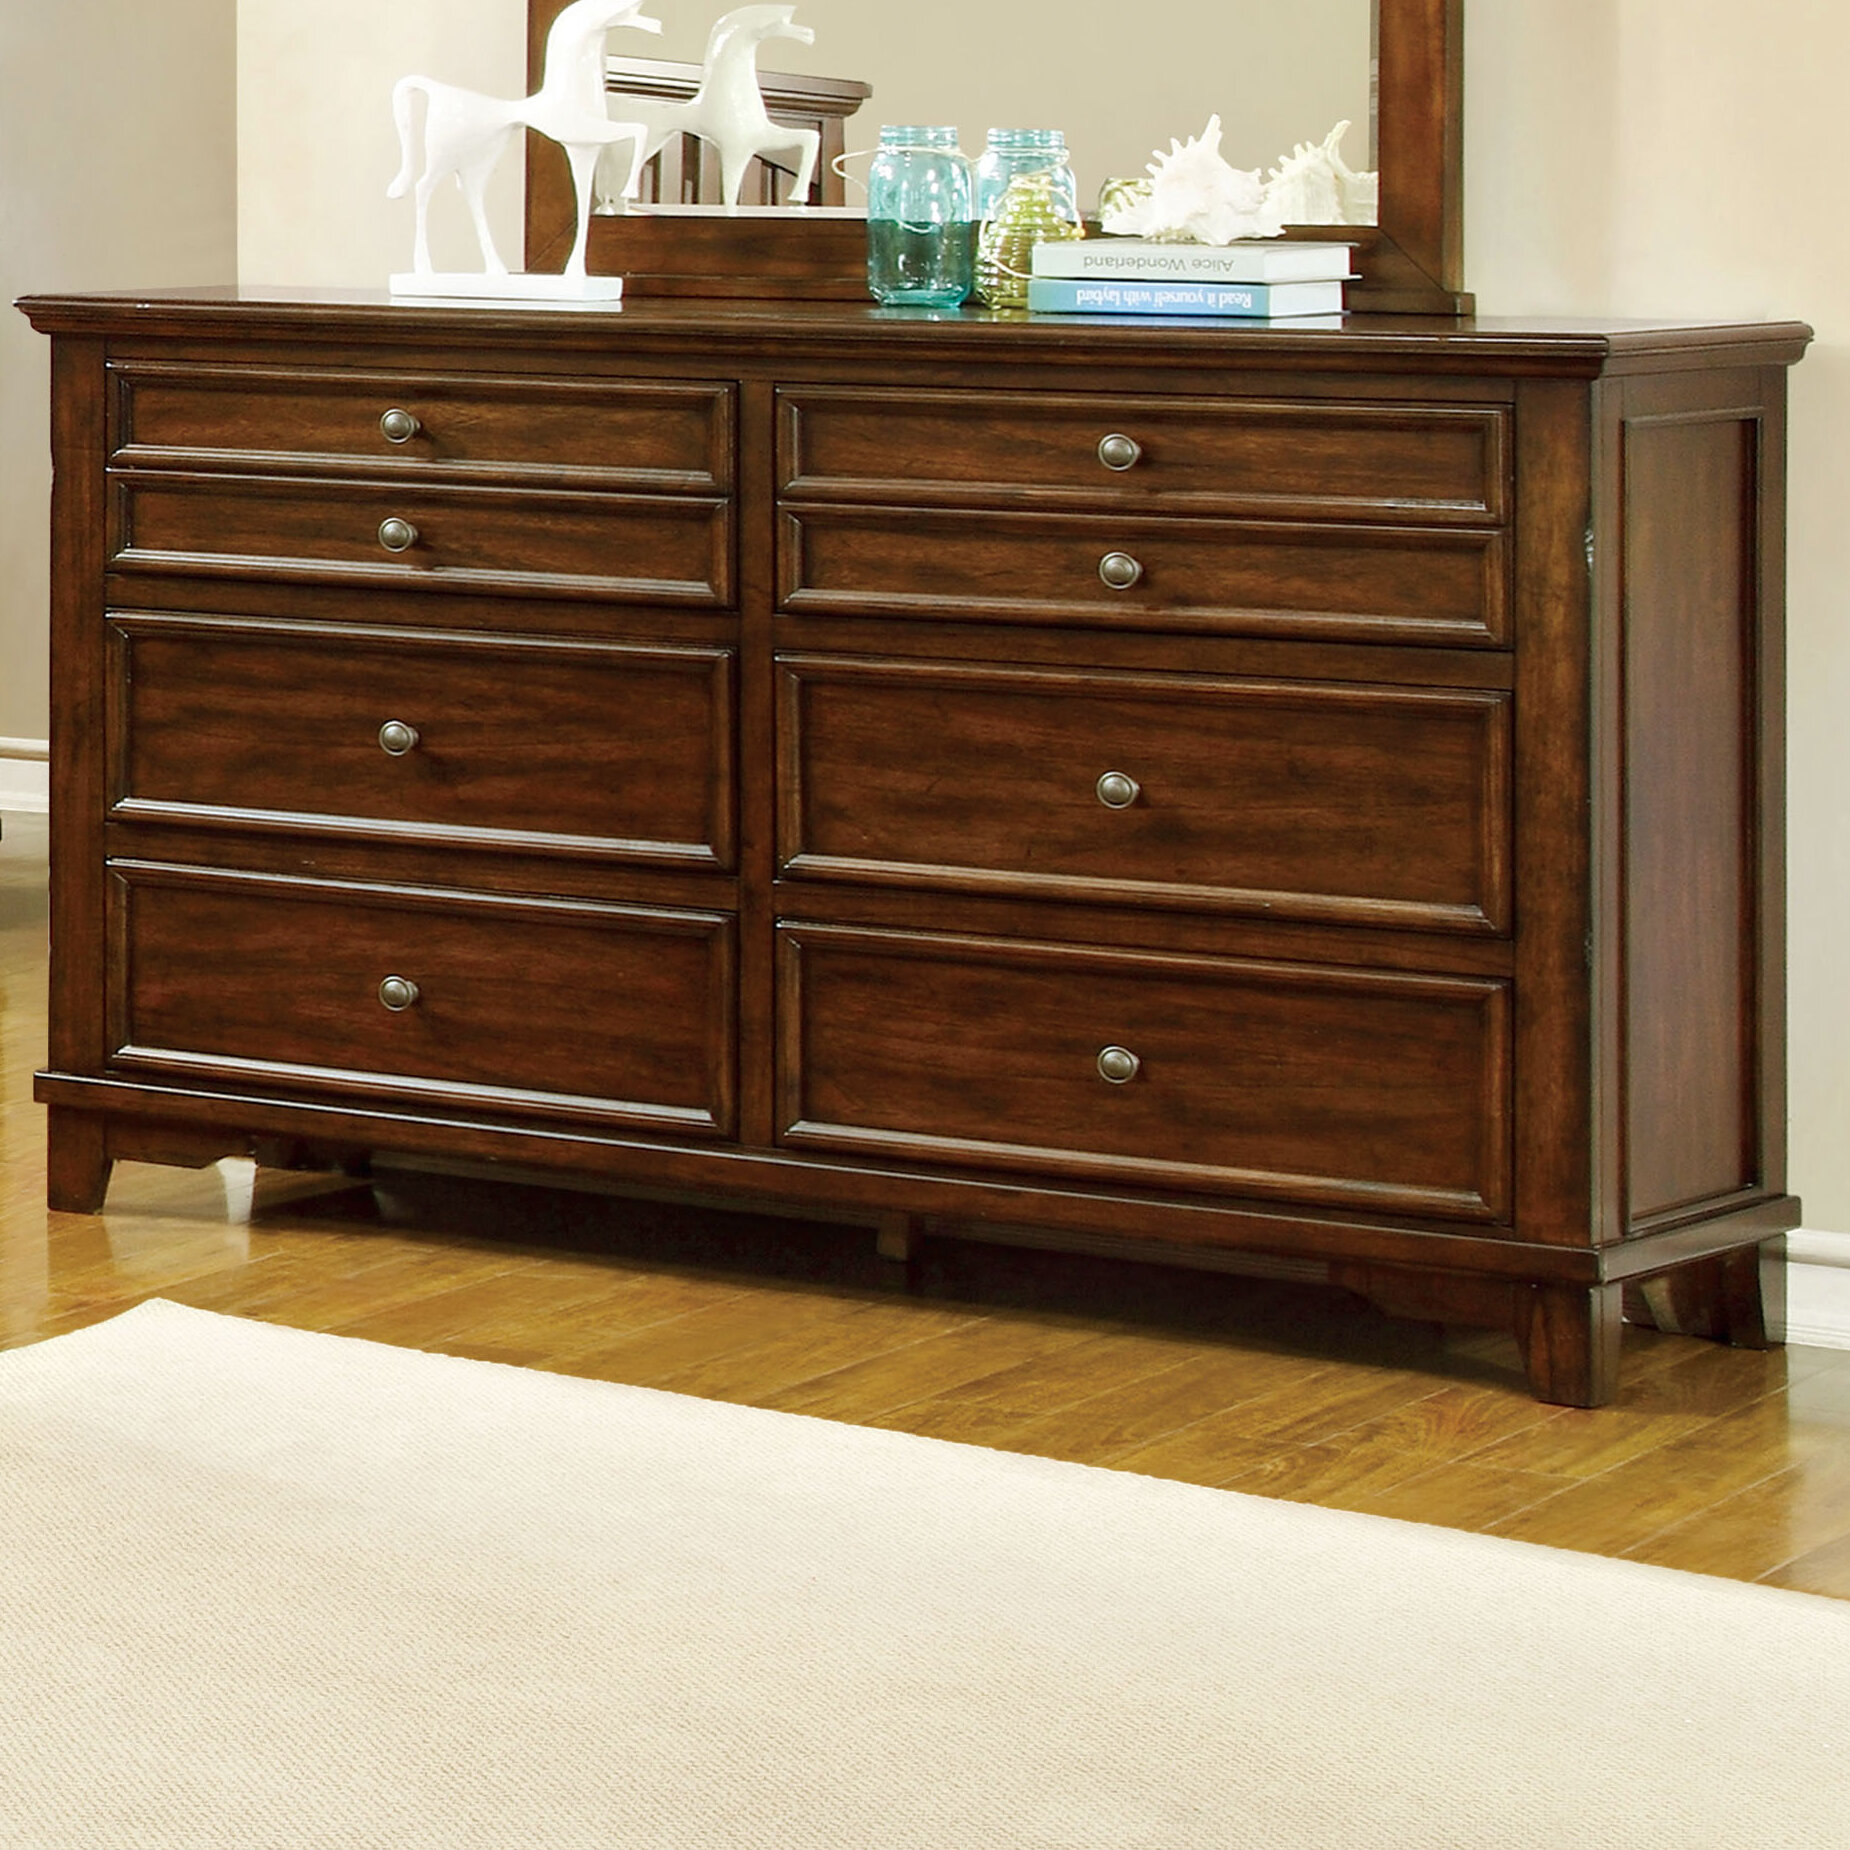 Cherry Wood Dressers Chests You Ll Love In 2021 Wayfair